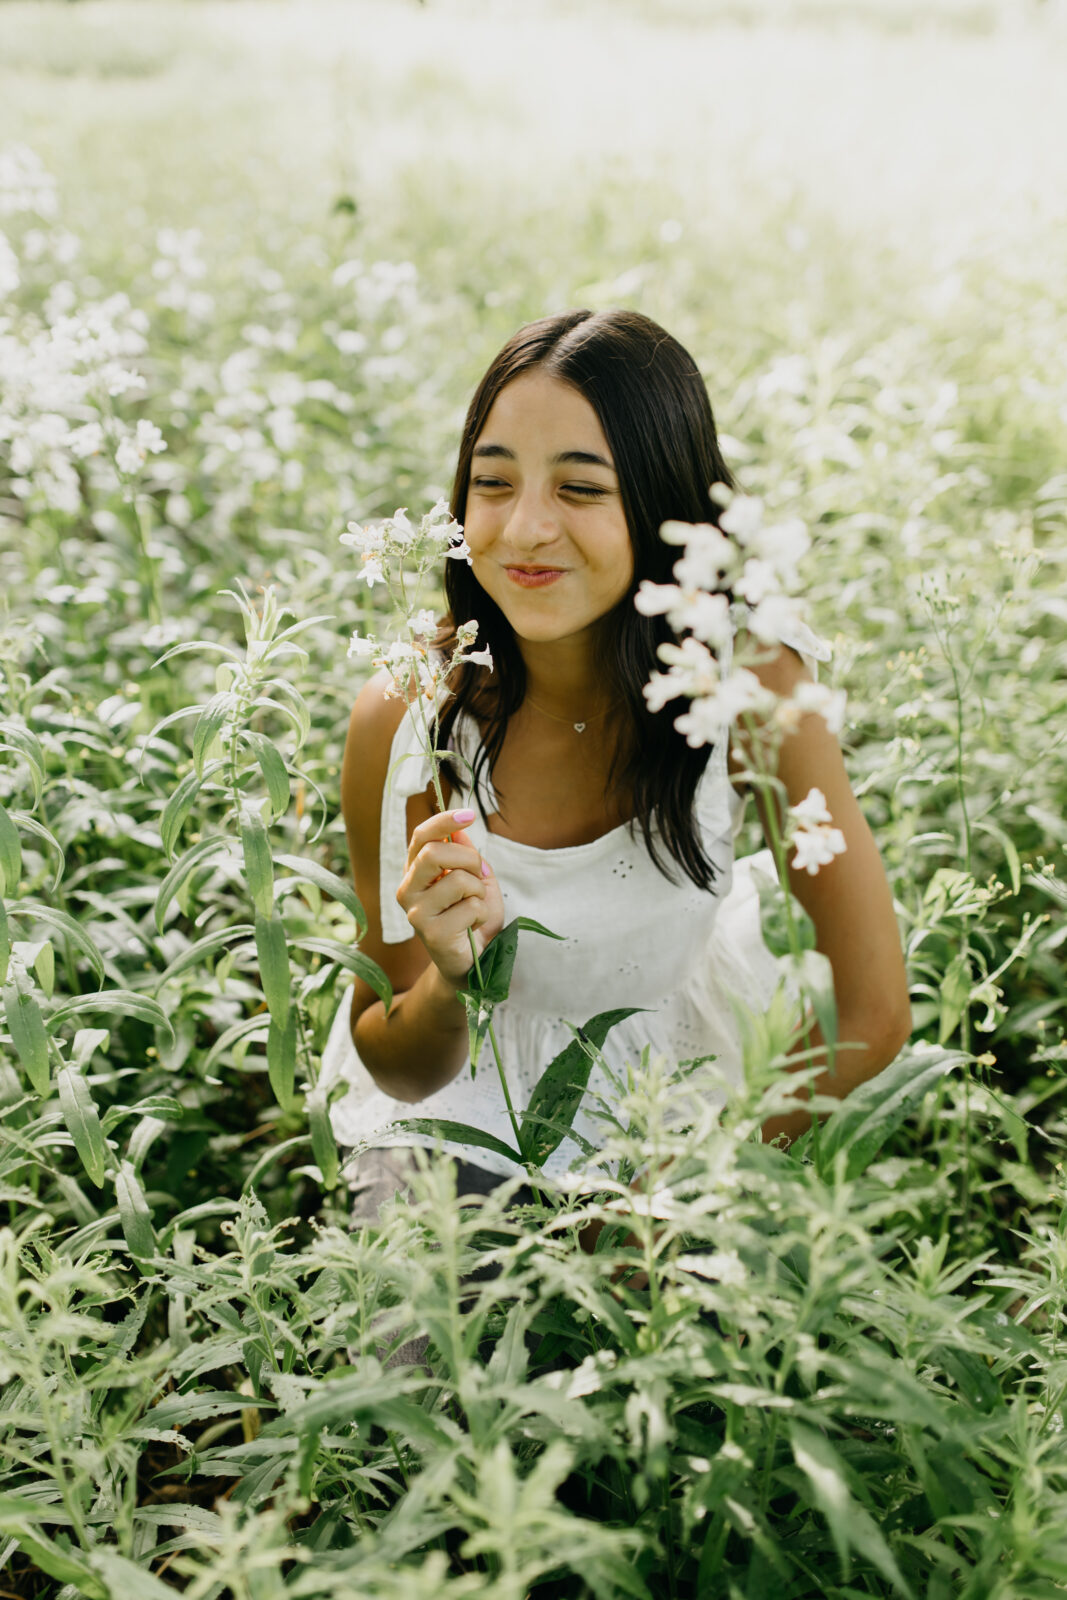 A lovely high school senior being photographed in a field of flowers